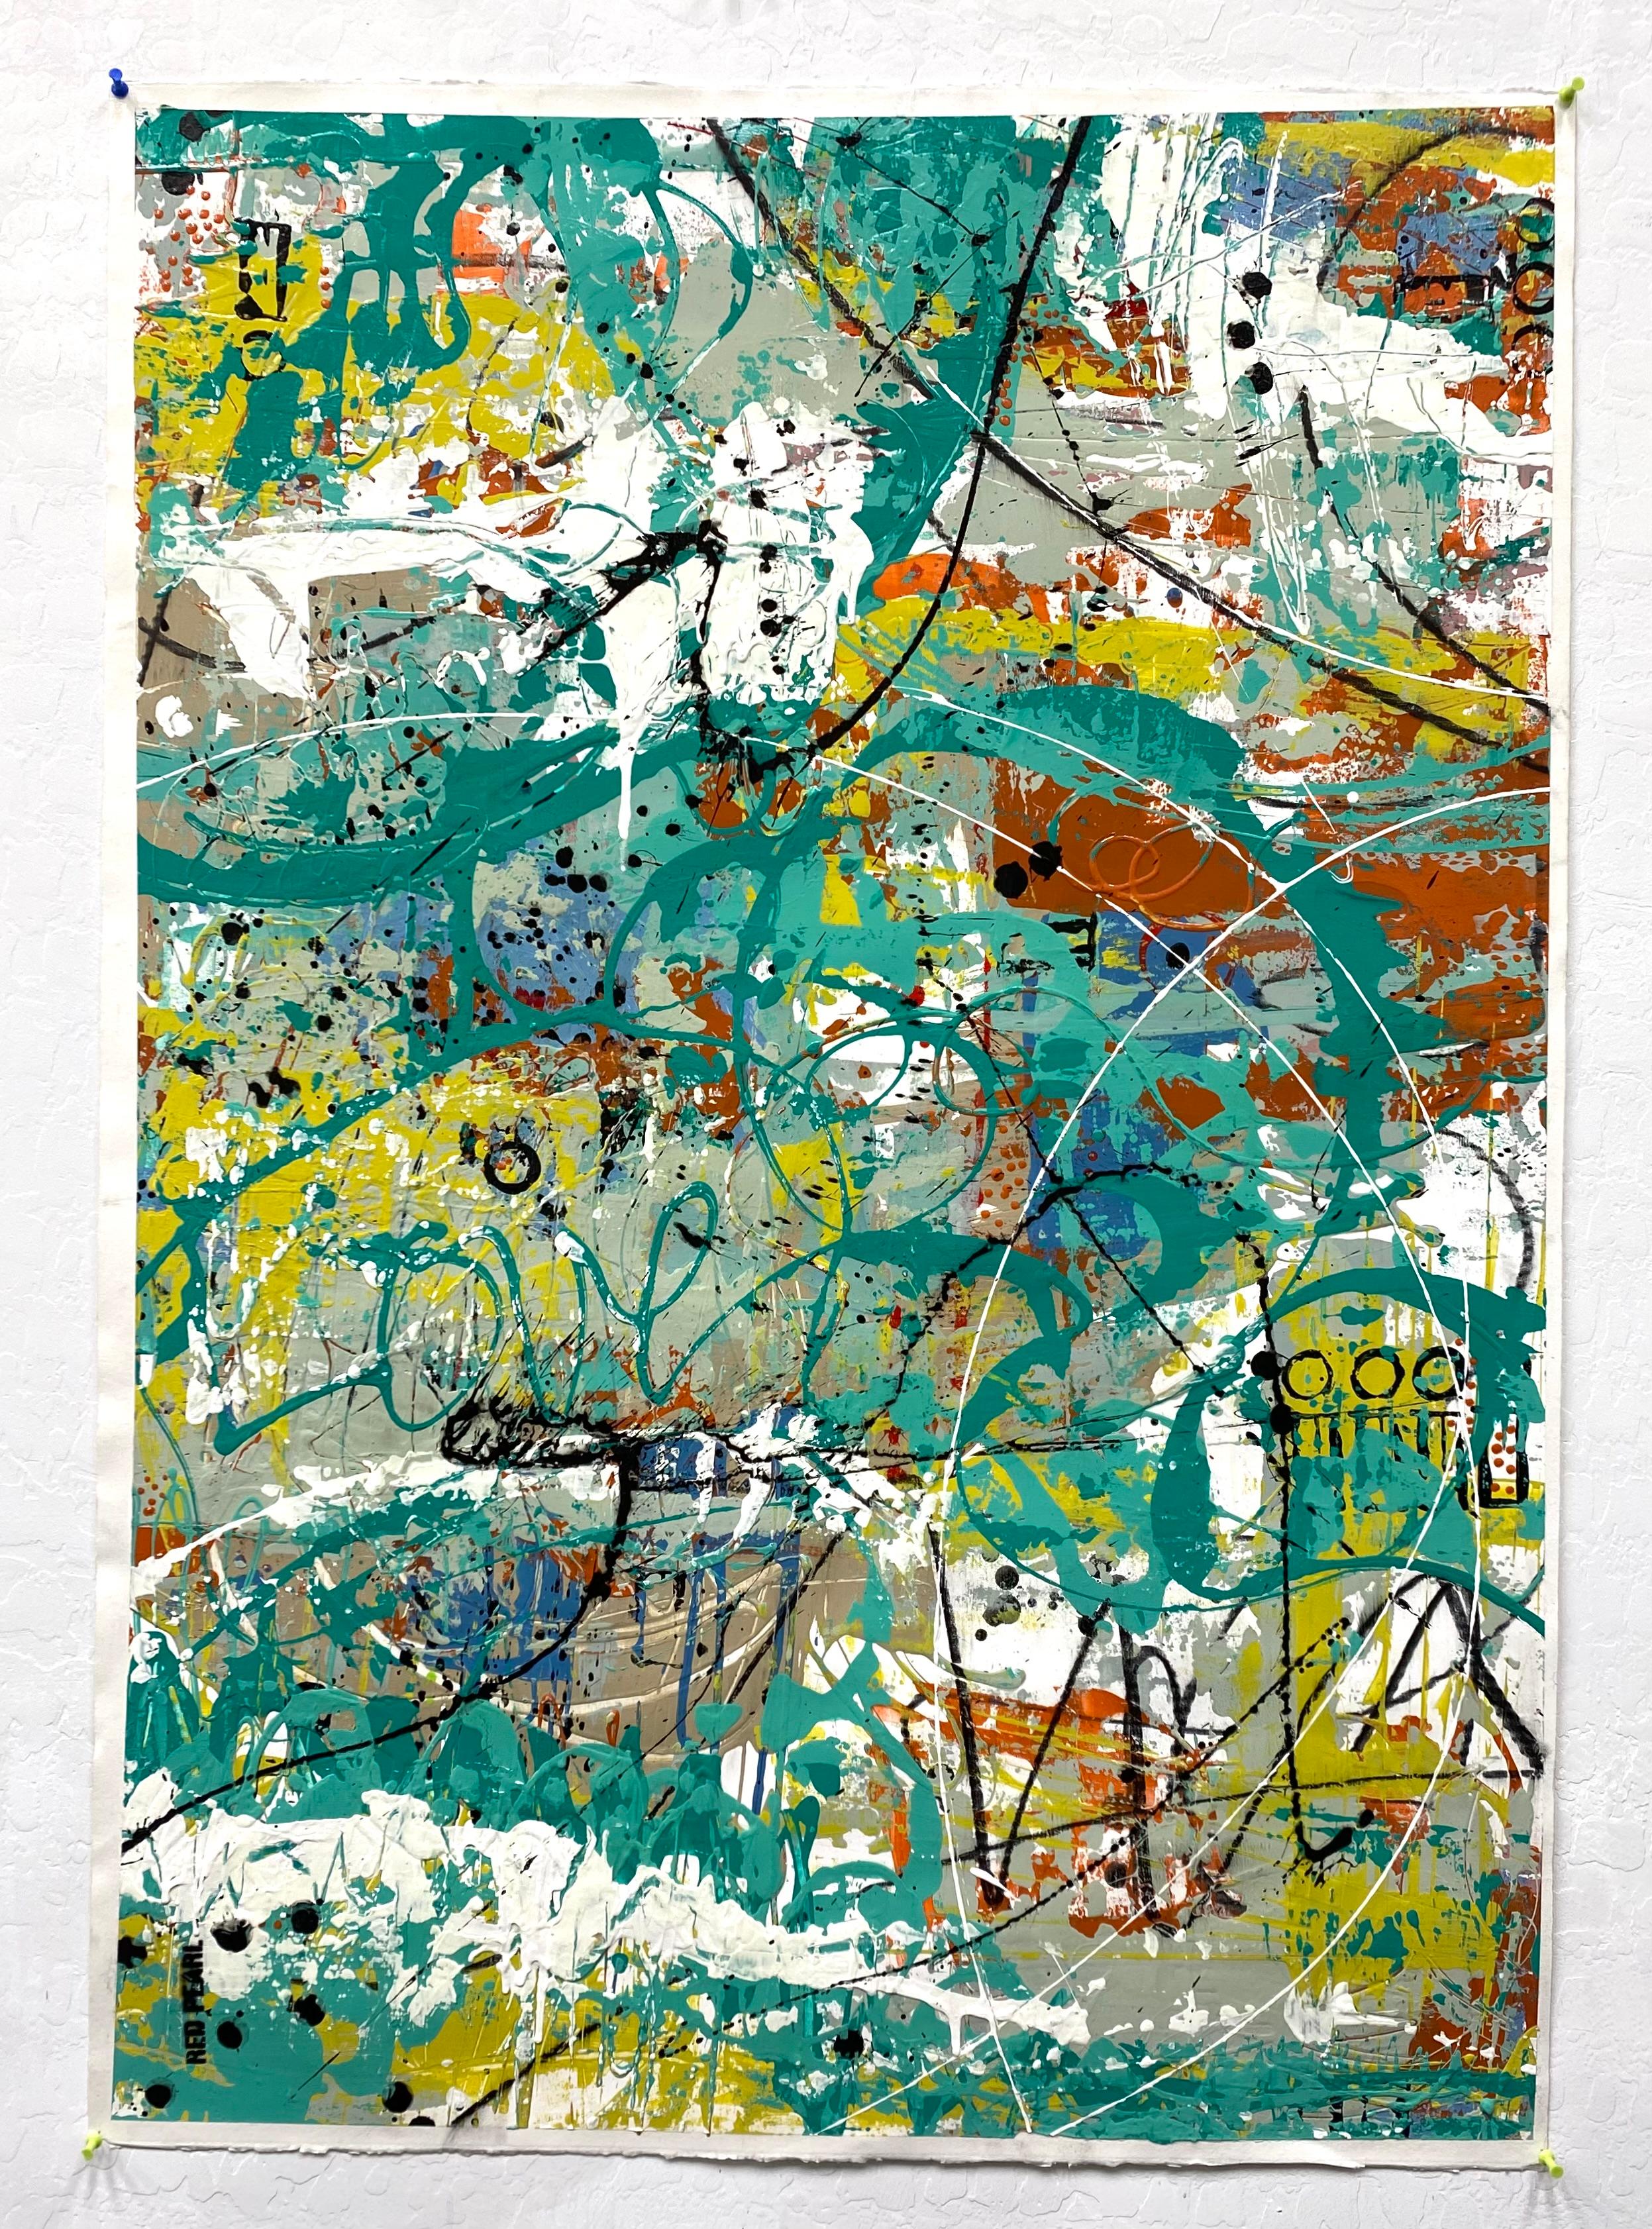 <p>Artist Comments<br>Artist Linda Shaffer paints a vibrant, multi-layered mixed media abstract. A bright mix of turquoise, rust, gray, black, and yellow fill the scene in swirls and drizzles. â€œThis painting was inspired by the joy of the many